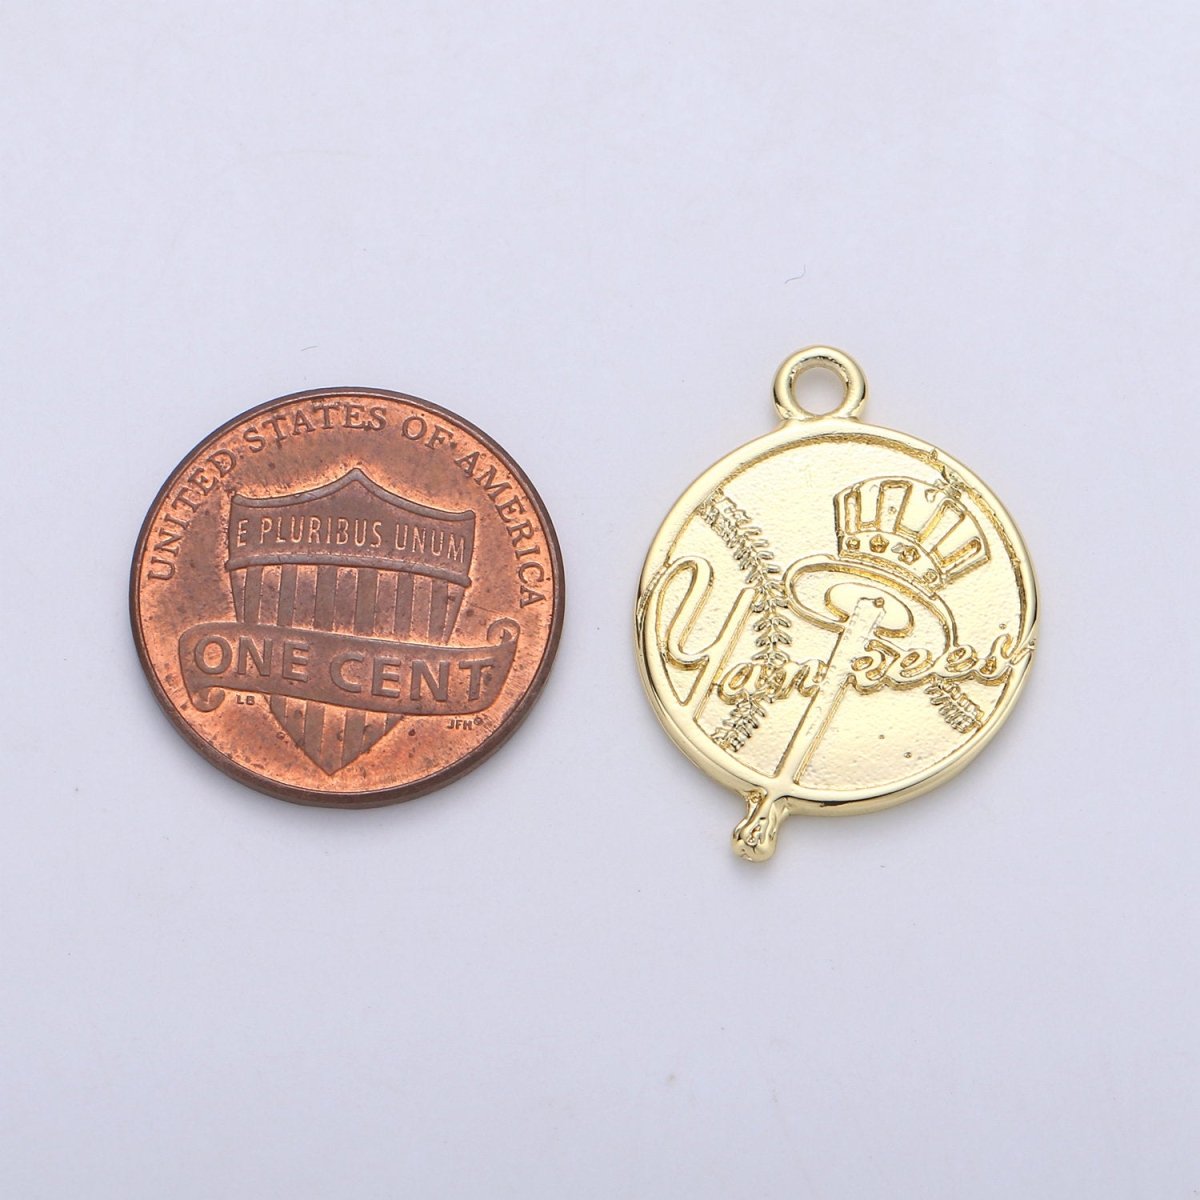 New York Charm, New York Pendant, Gold New Yorker Charm Dainty Small Charm for Bracelet Necklace Earring, C-881 - DLUXCA